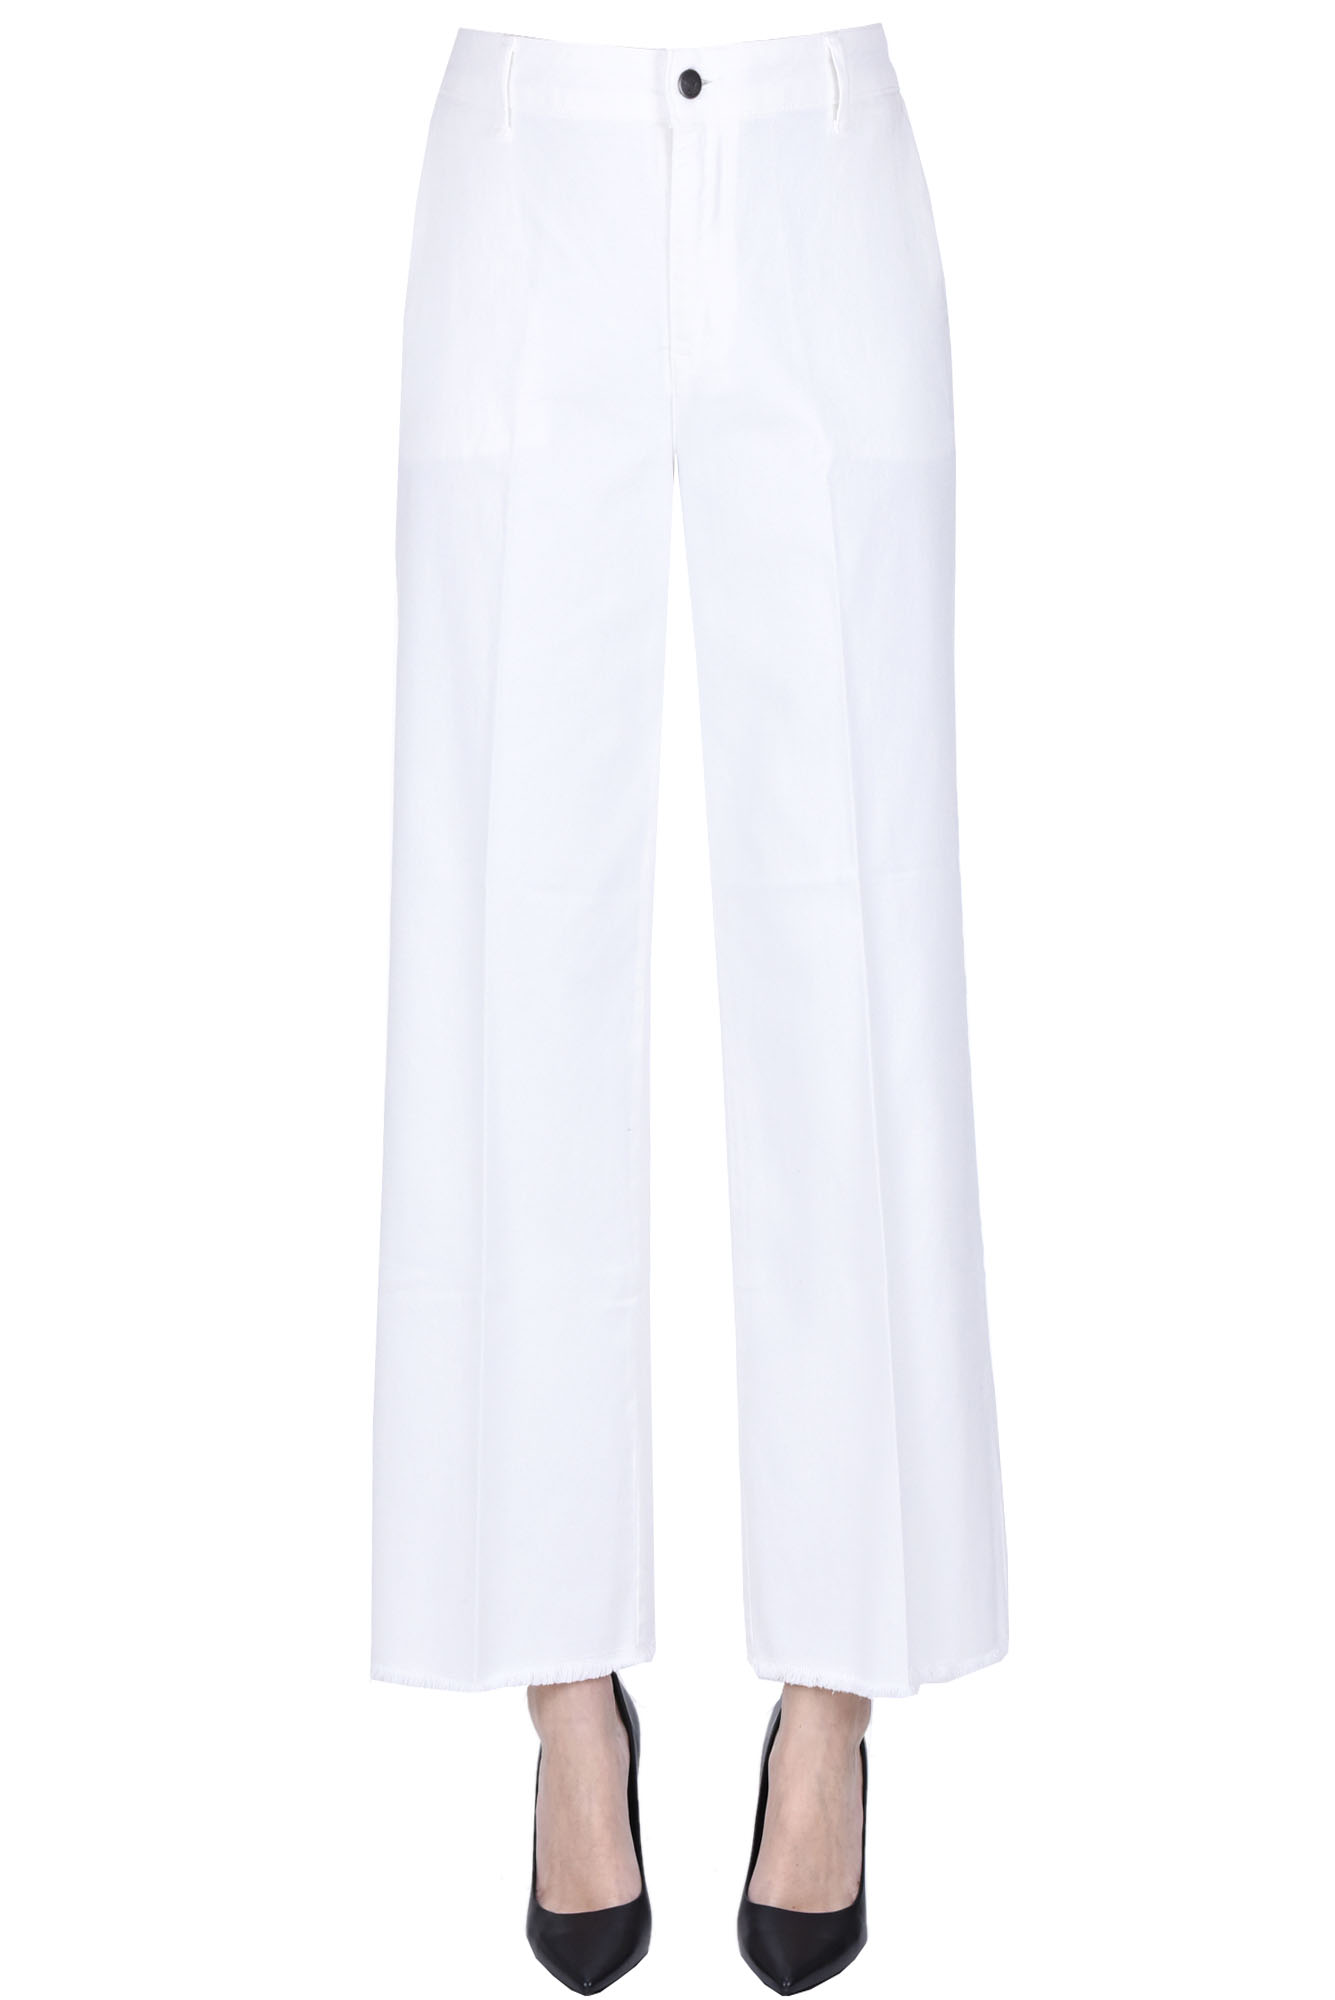 Shop Cigala's Chino Style Jeans In White